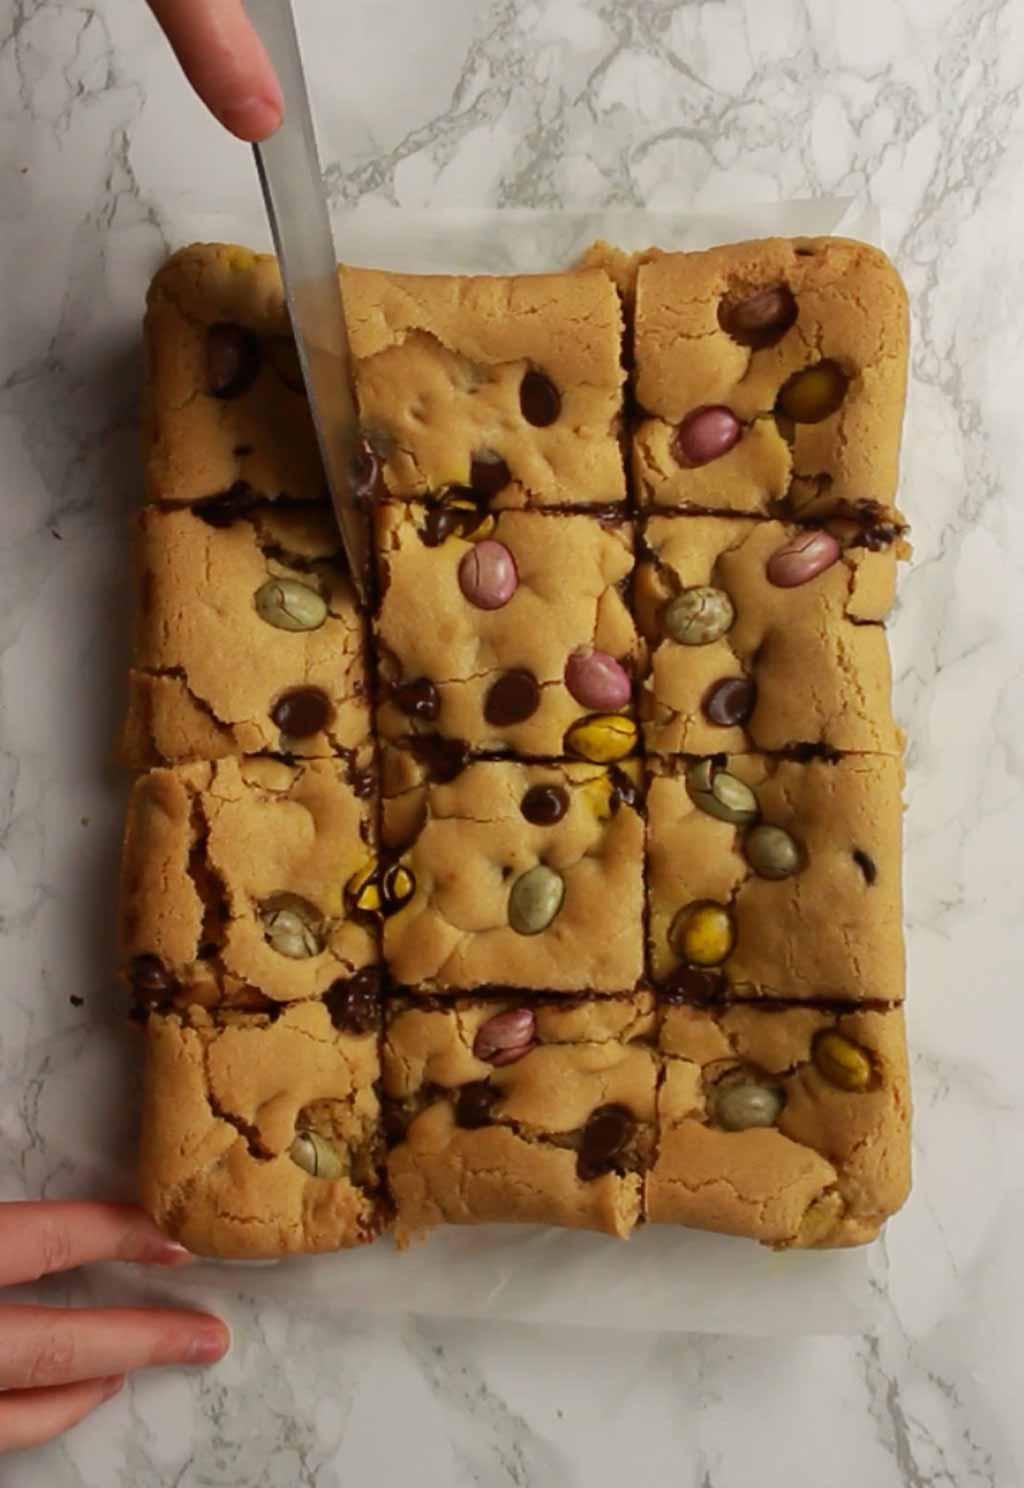 Cutting The Cookie Into Bars